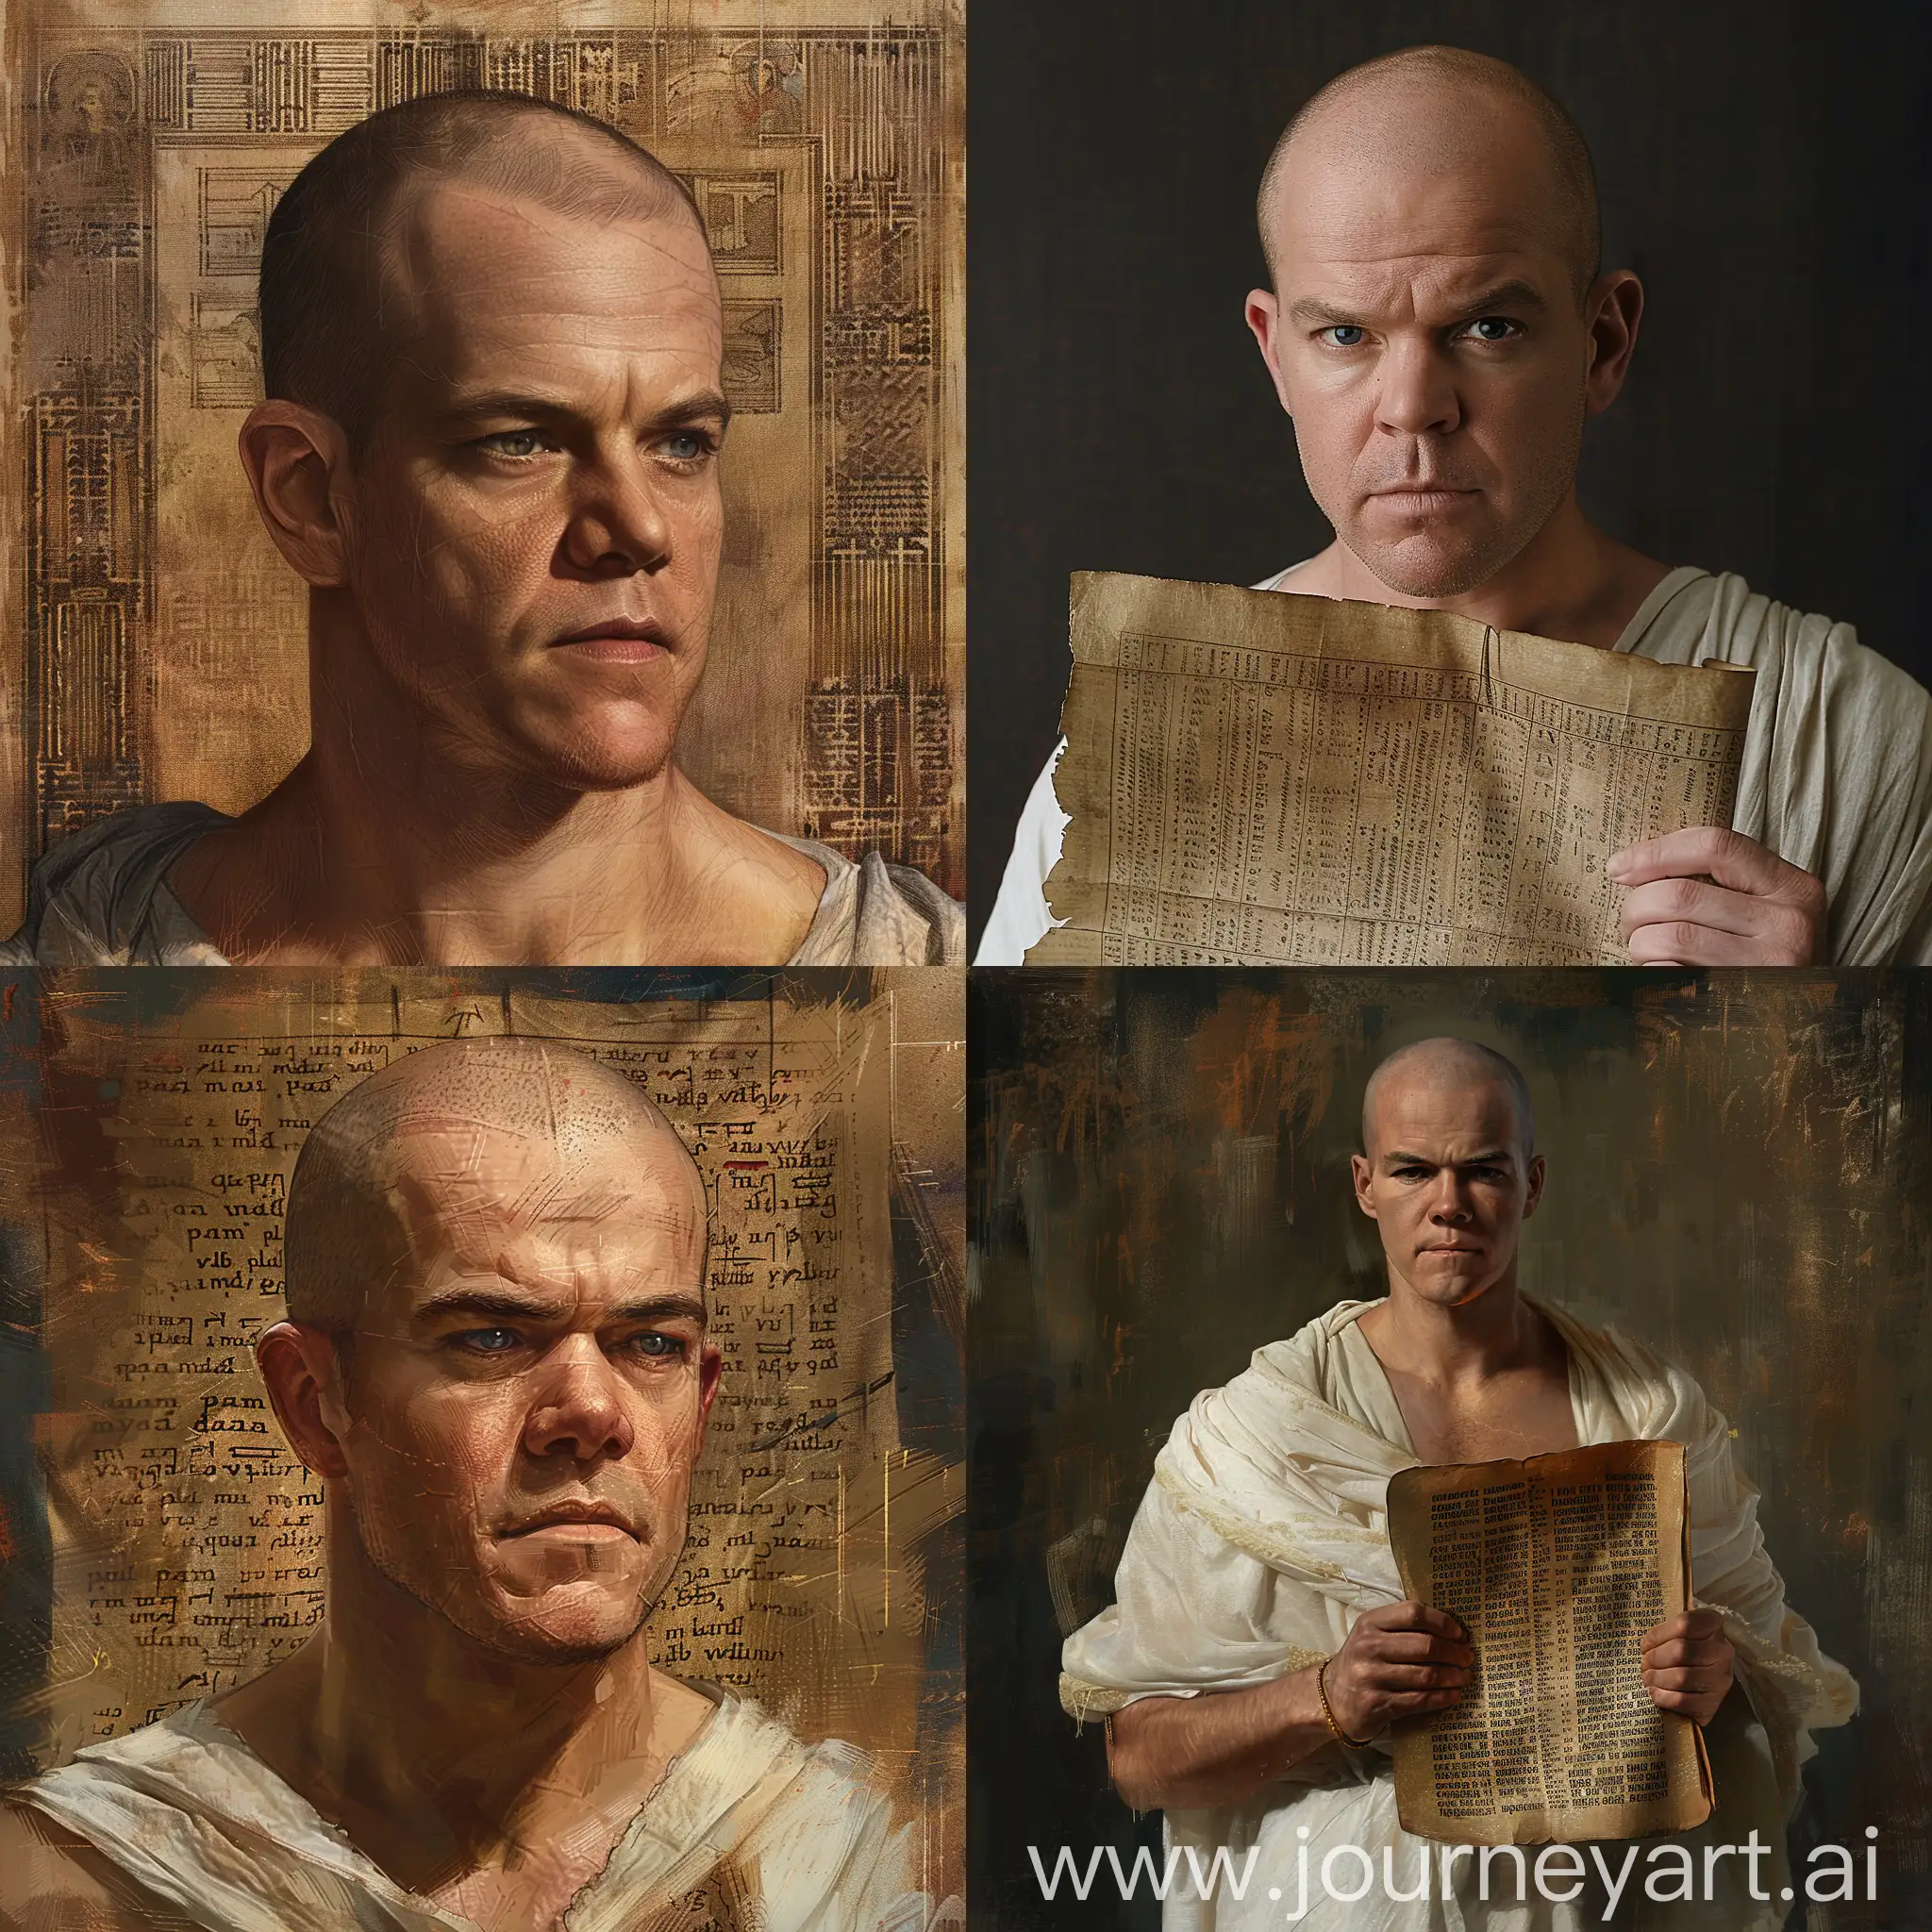 matt damon bald in the style of davincci as a papyrus from the bible